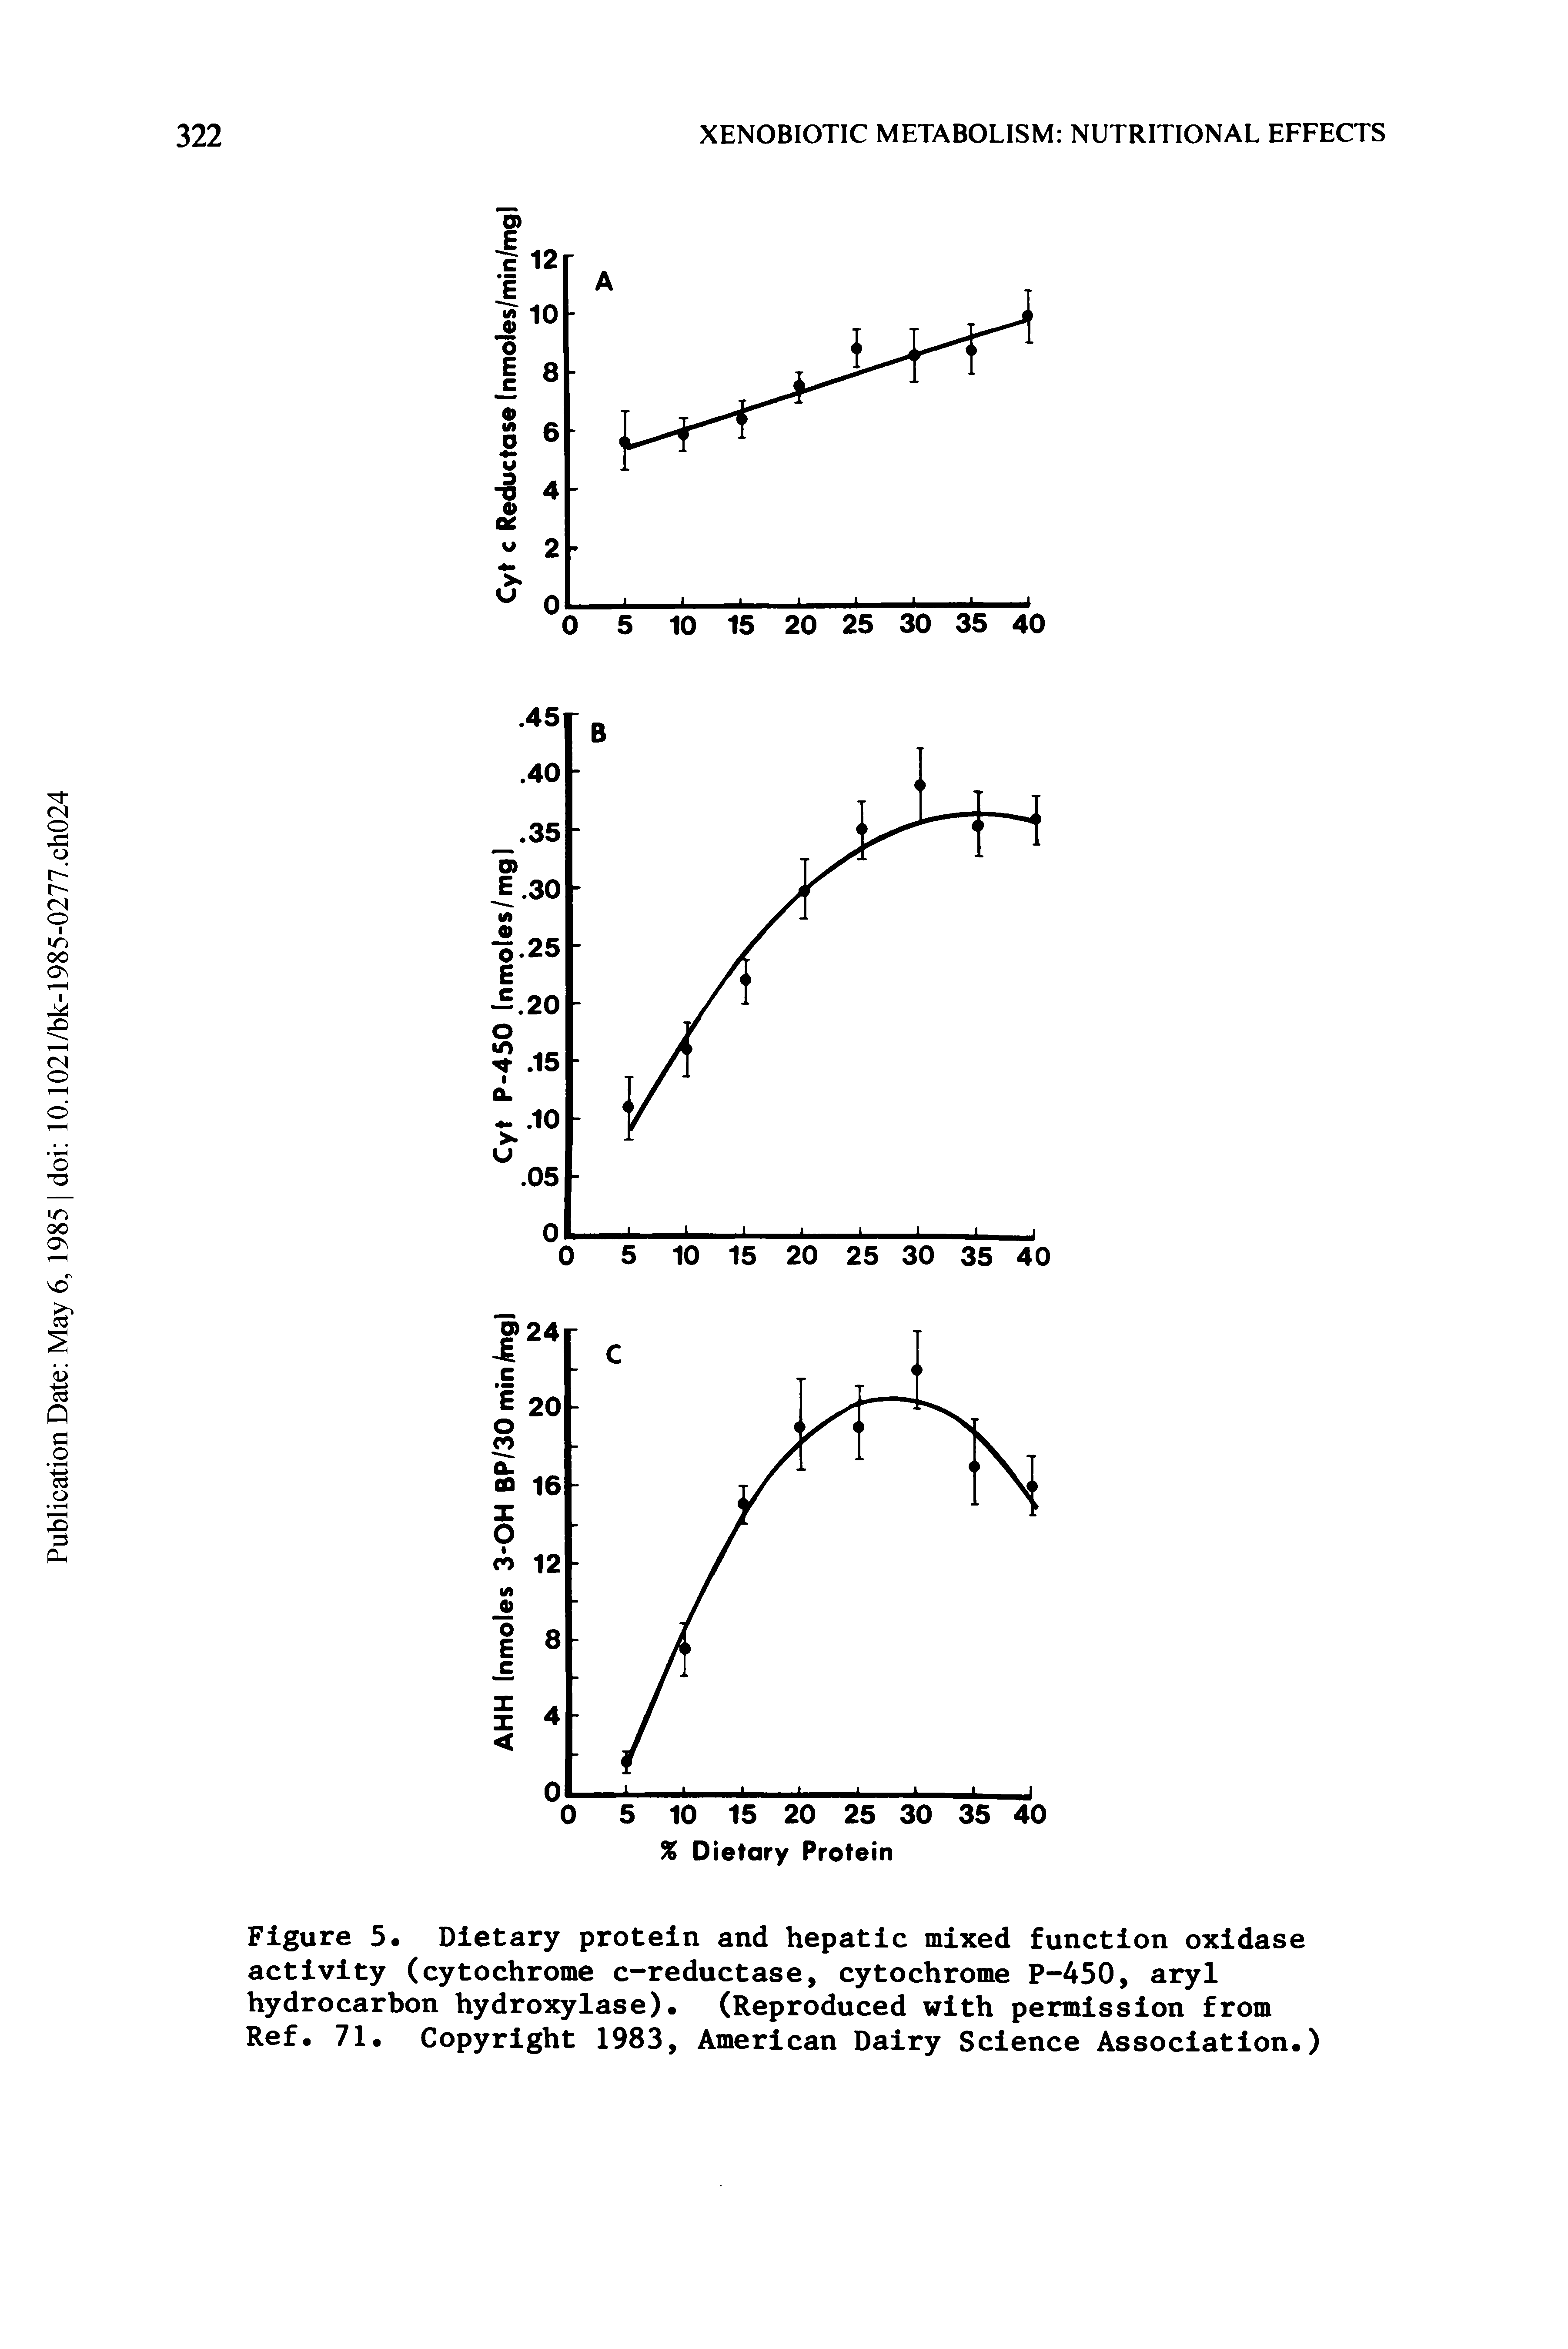 Figure 5. Dietary protein and hepatic mixed function oxidase activity (cytochrome c-reductase, cytochrome P-450, aryl hydrocarbon hydroxylase). (Reproduced with permission from Ref. 71. Copyright 1983, American Dairy Science Association.)...